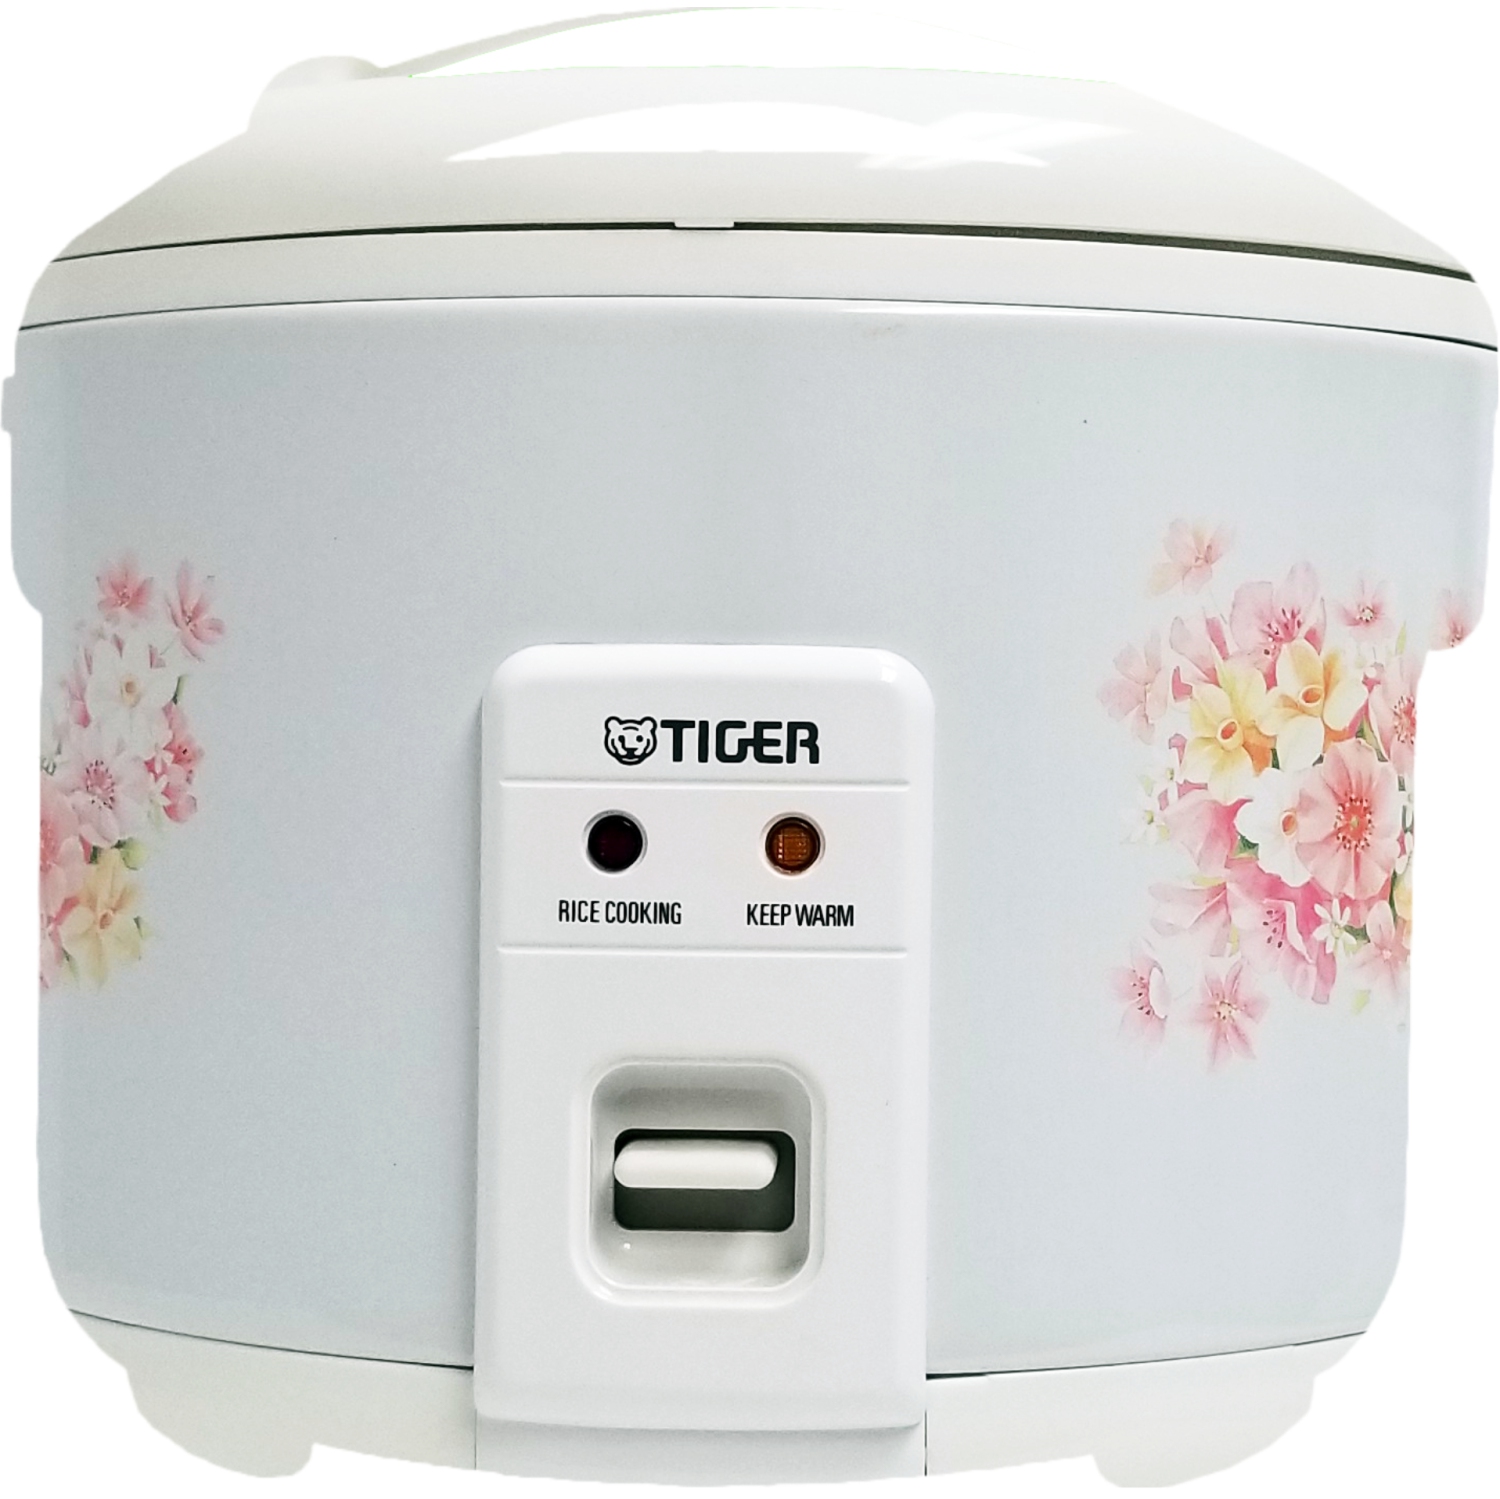 Tiger JNP-1800 Conventional Rice Cooker, 10 Cups - Made in Japan